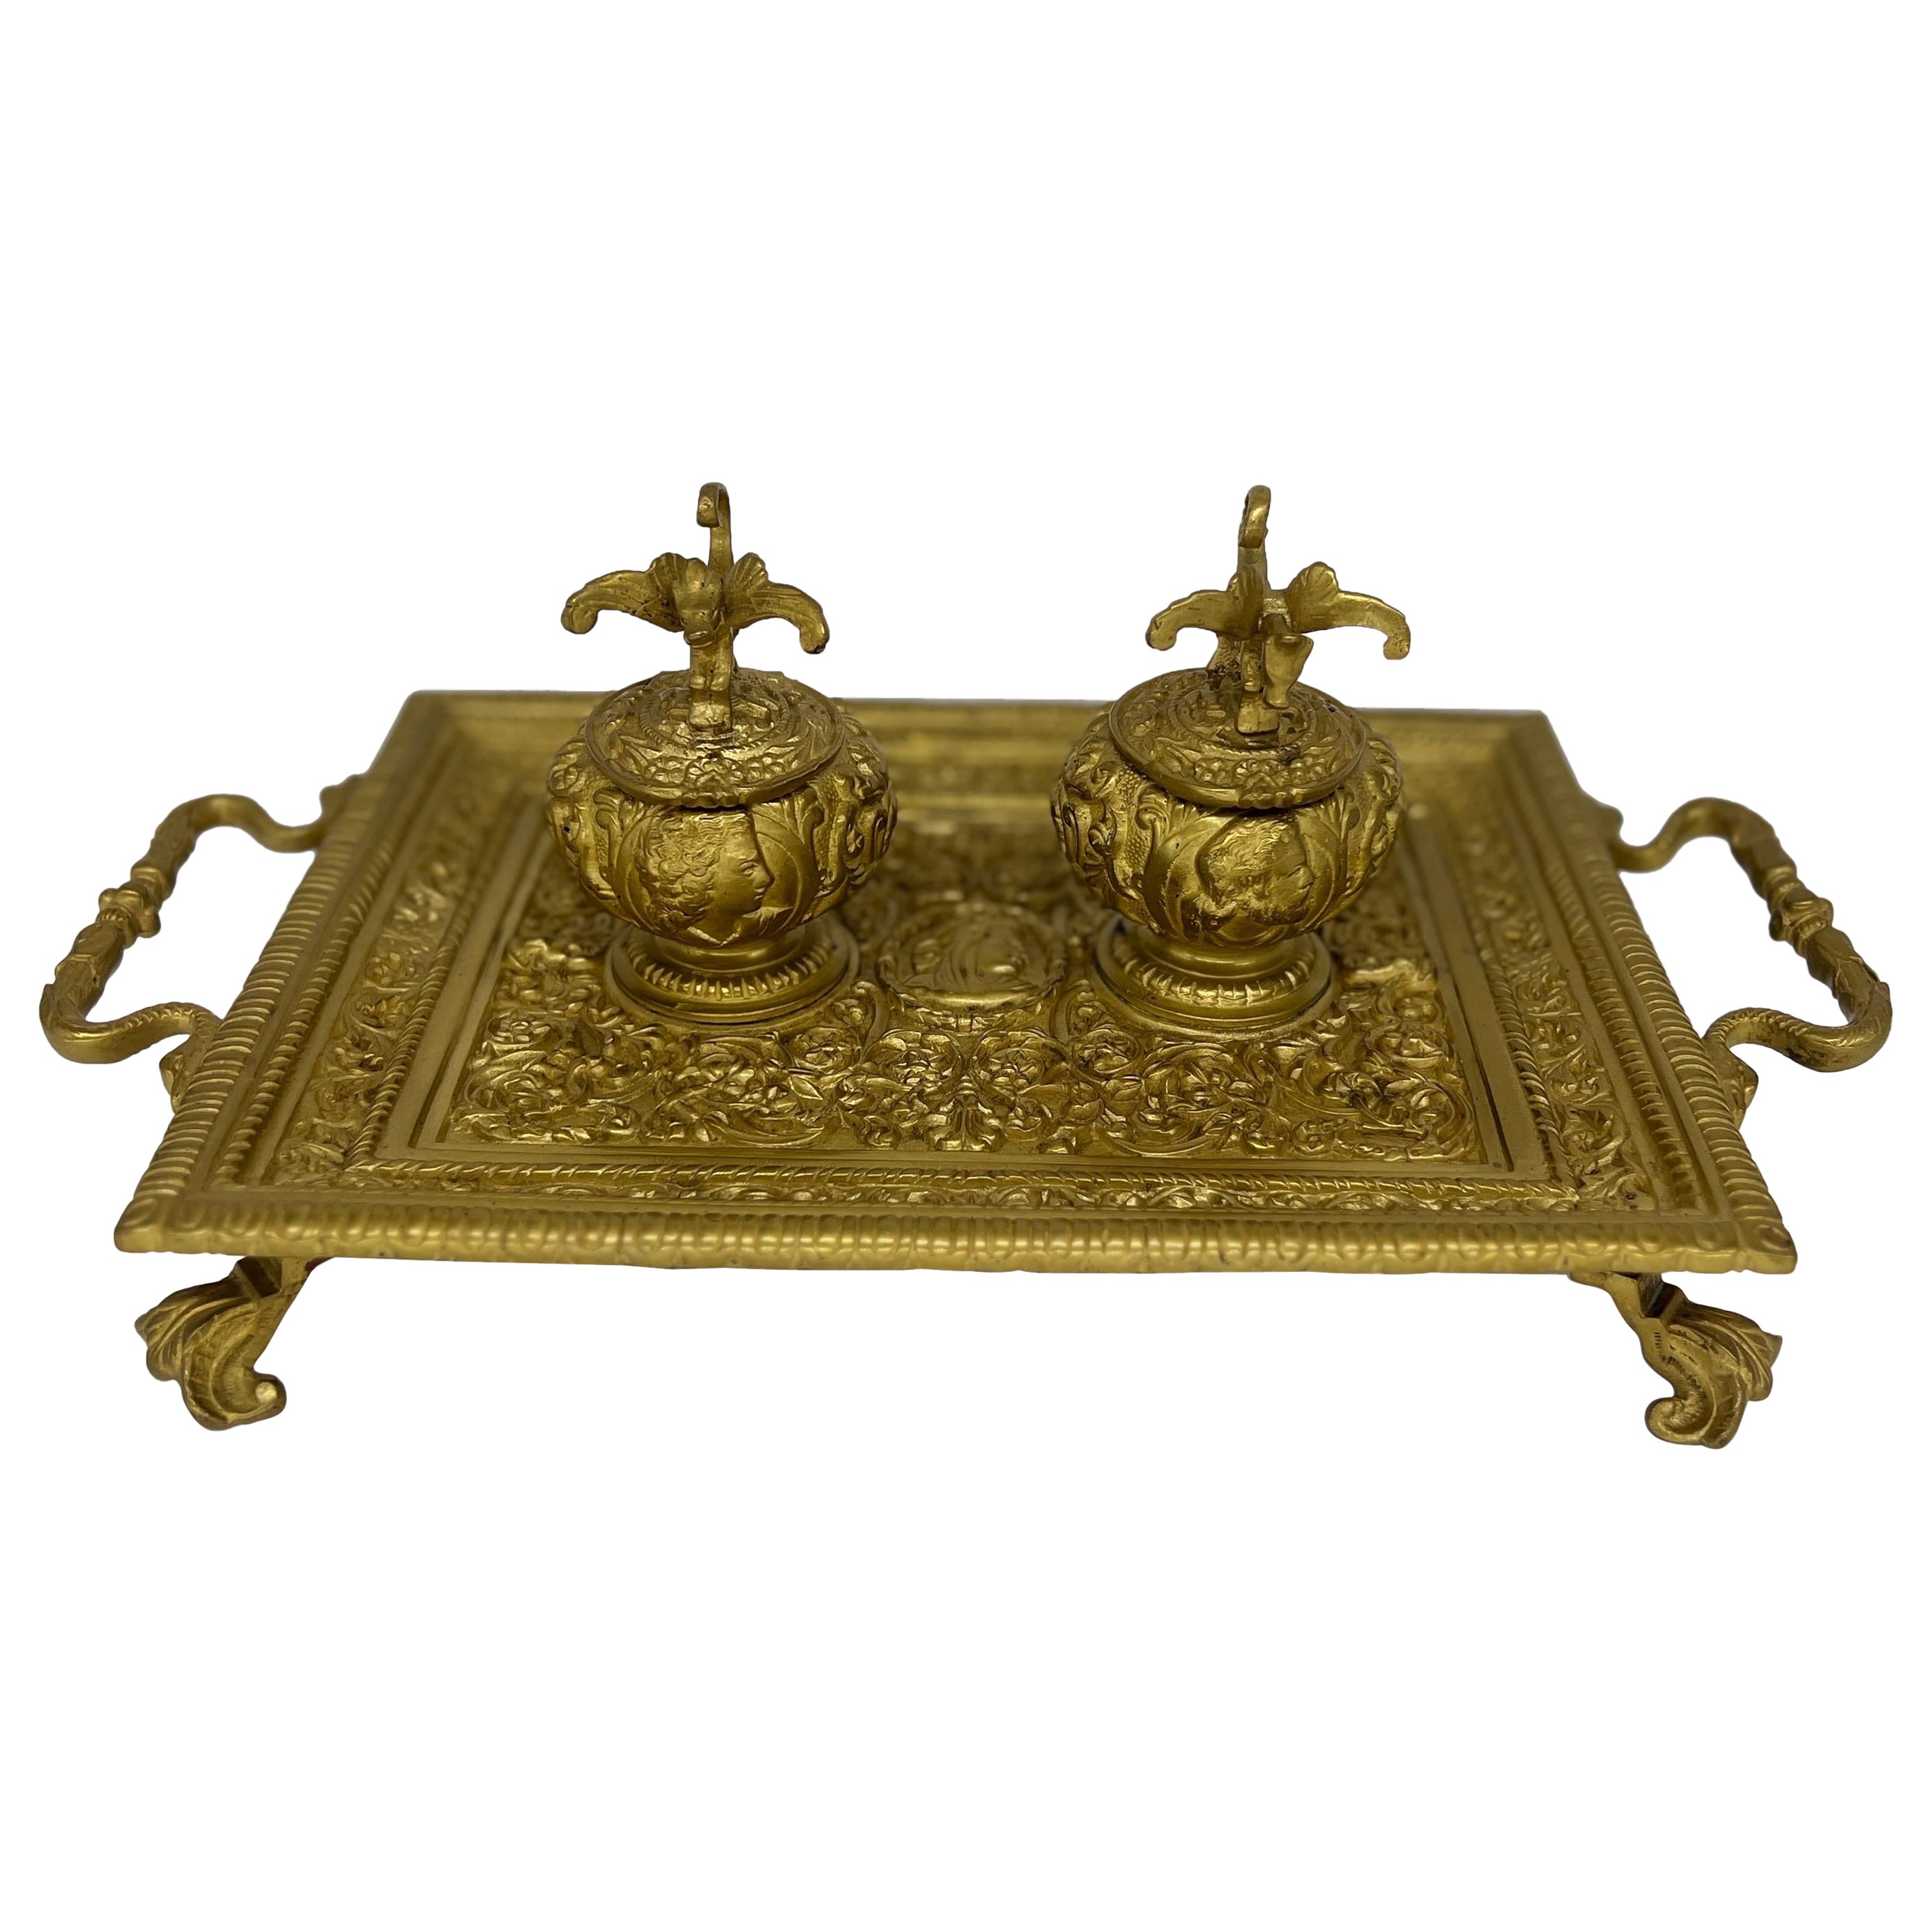 Emancipation Proclamation Inkstand - 19th Century Heavily Chased Brass For Sale